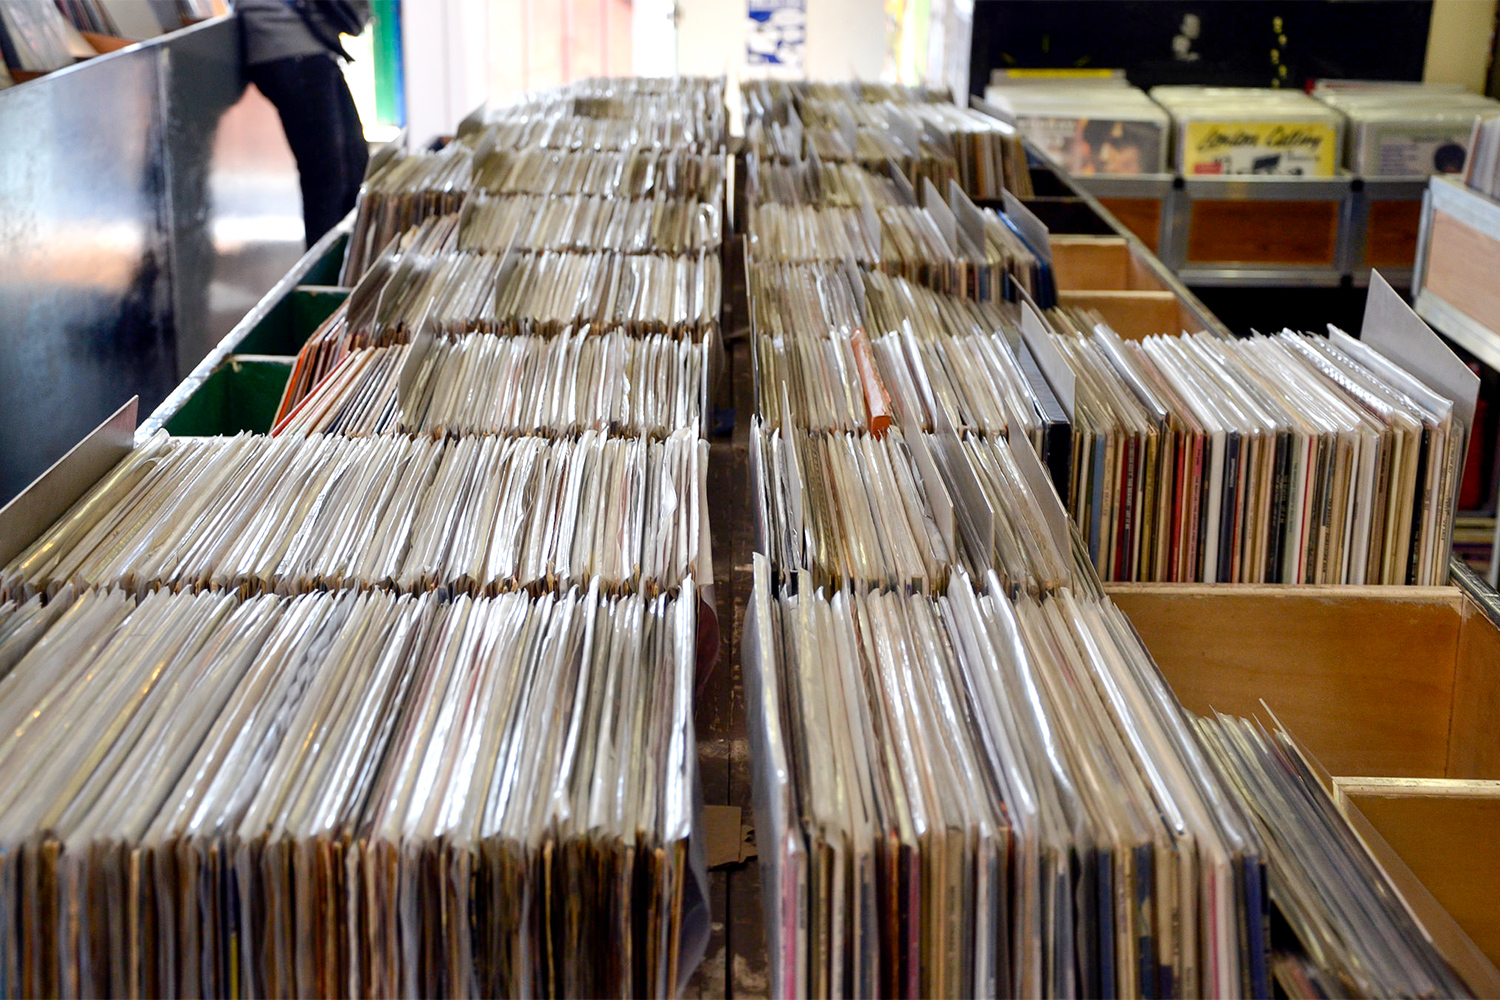 How to Use DISCOGS to Become a Better Record Collector